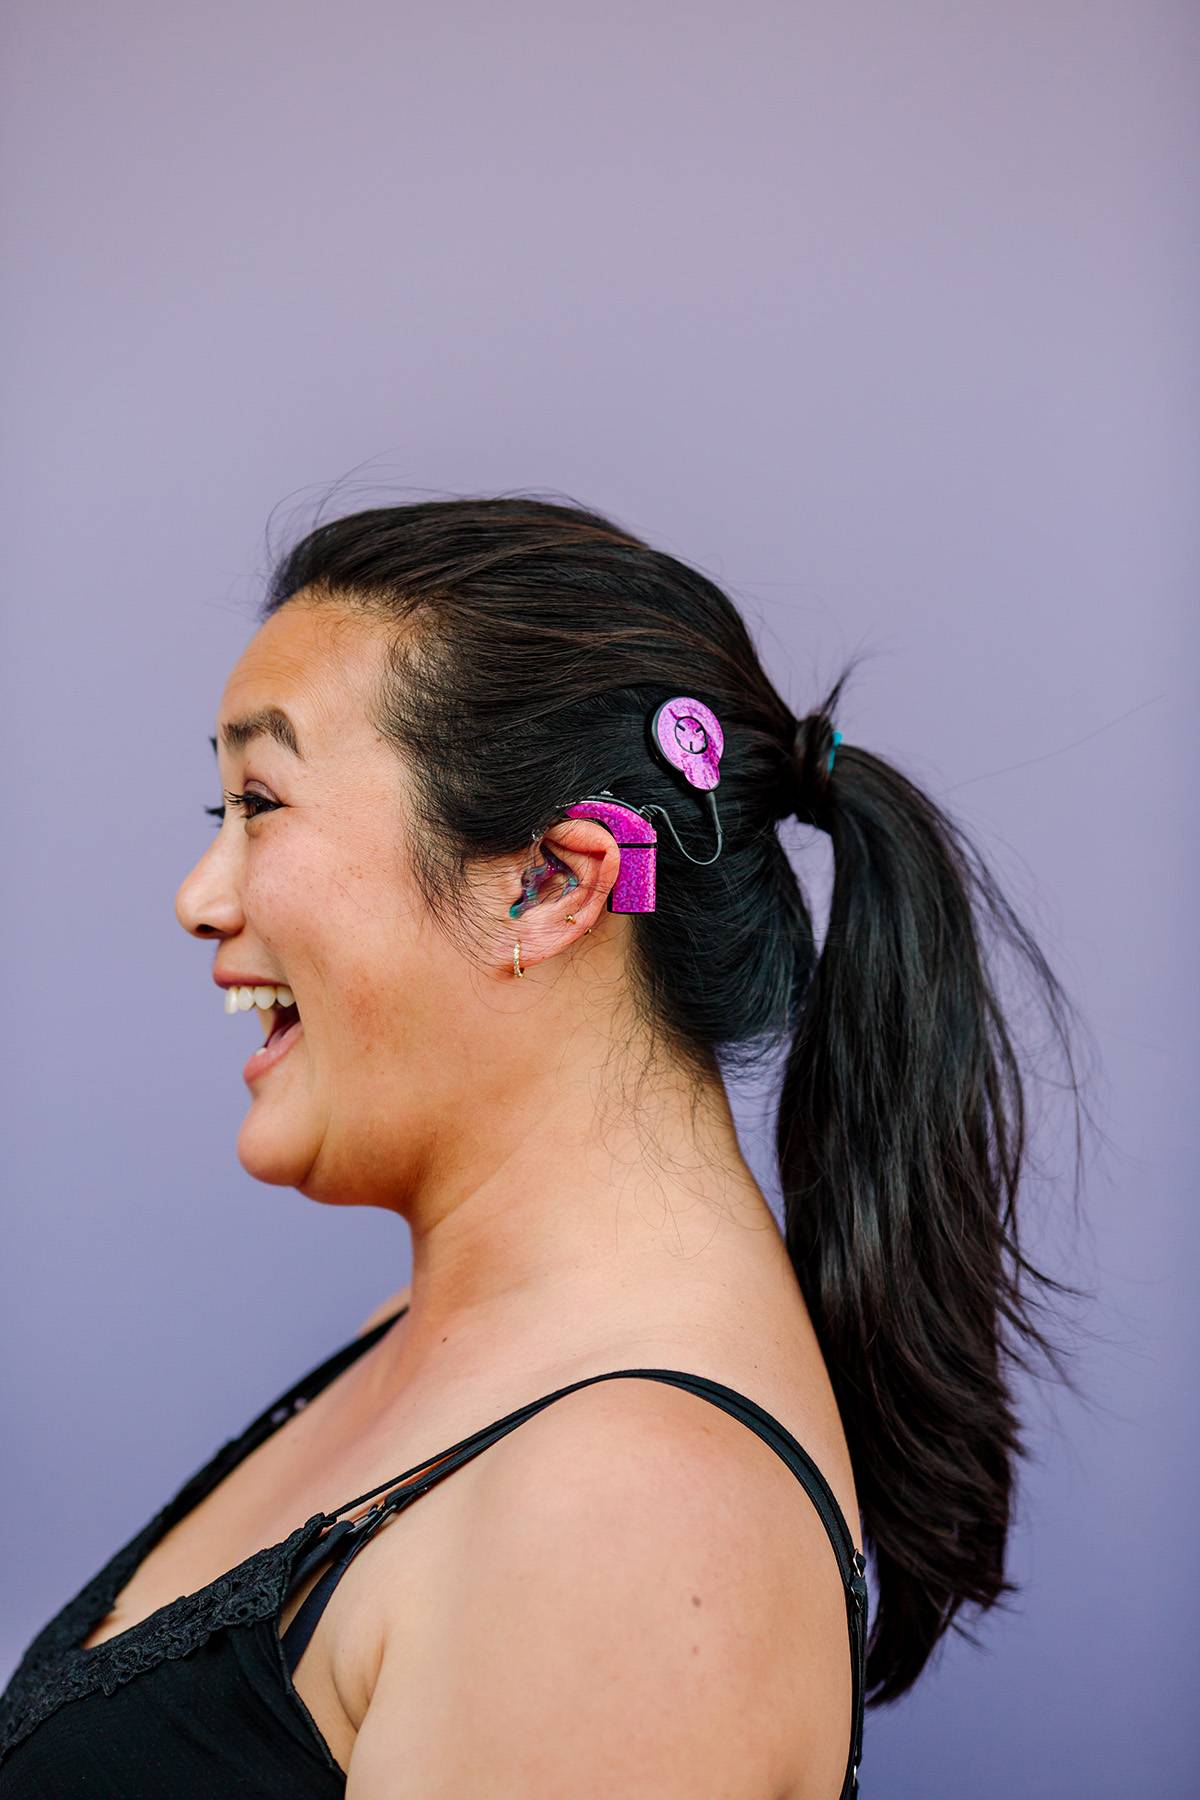 Profile of smiling Asian female in black camisole with hair in ponytail. She has a disability and wears hearing device. Purple wall in background.